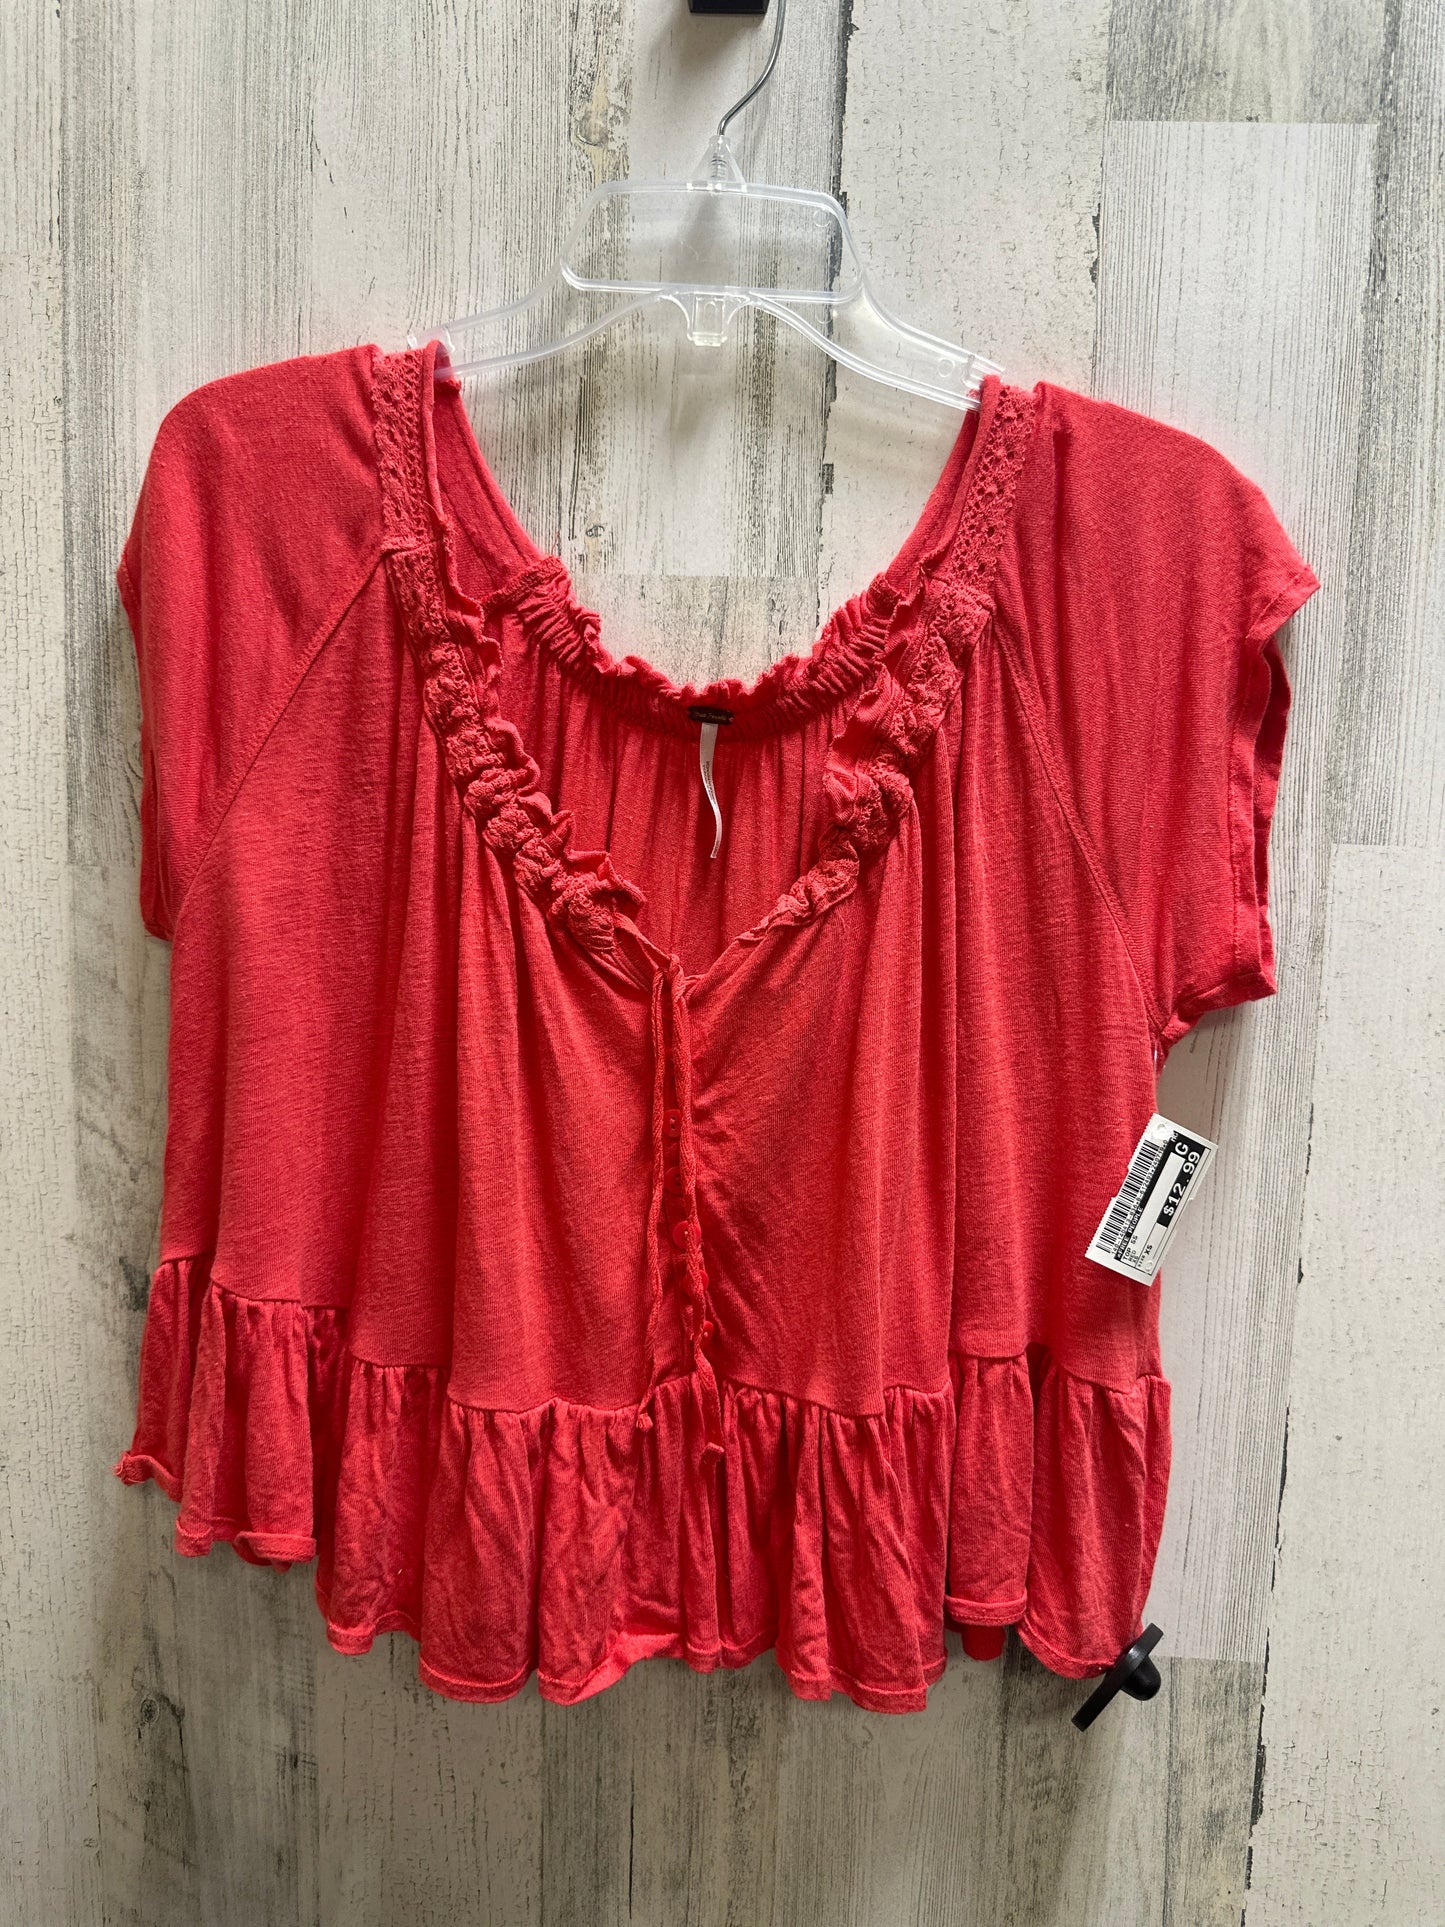 Red Top Short Sleeve Free People, Size Xs